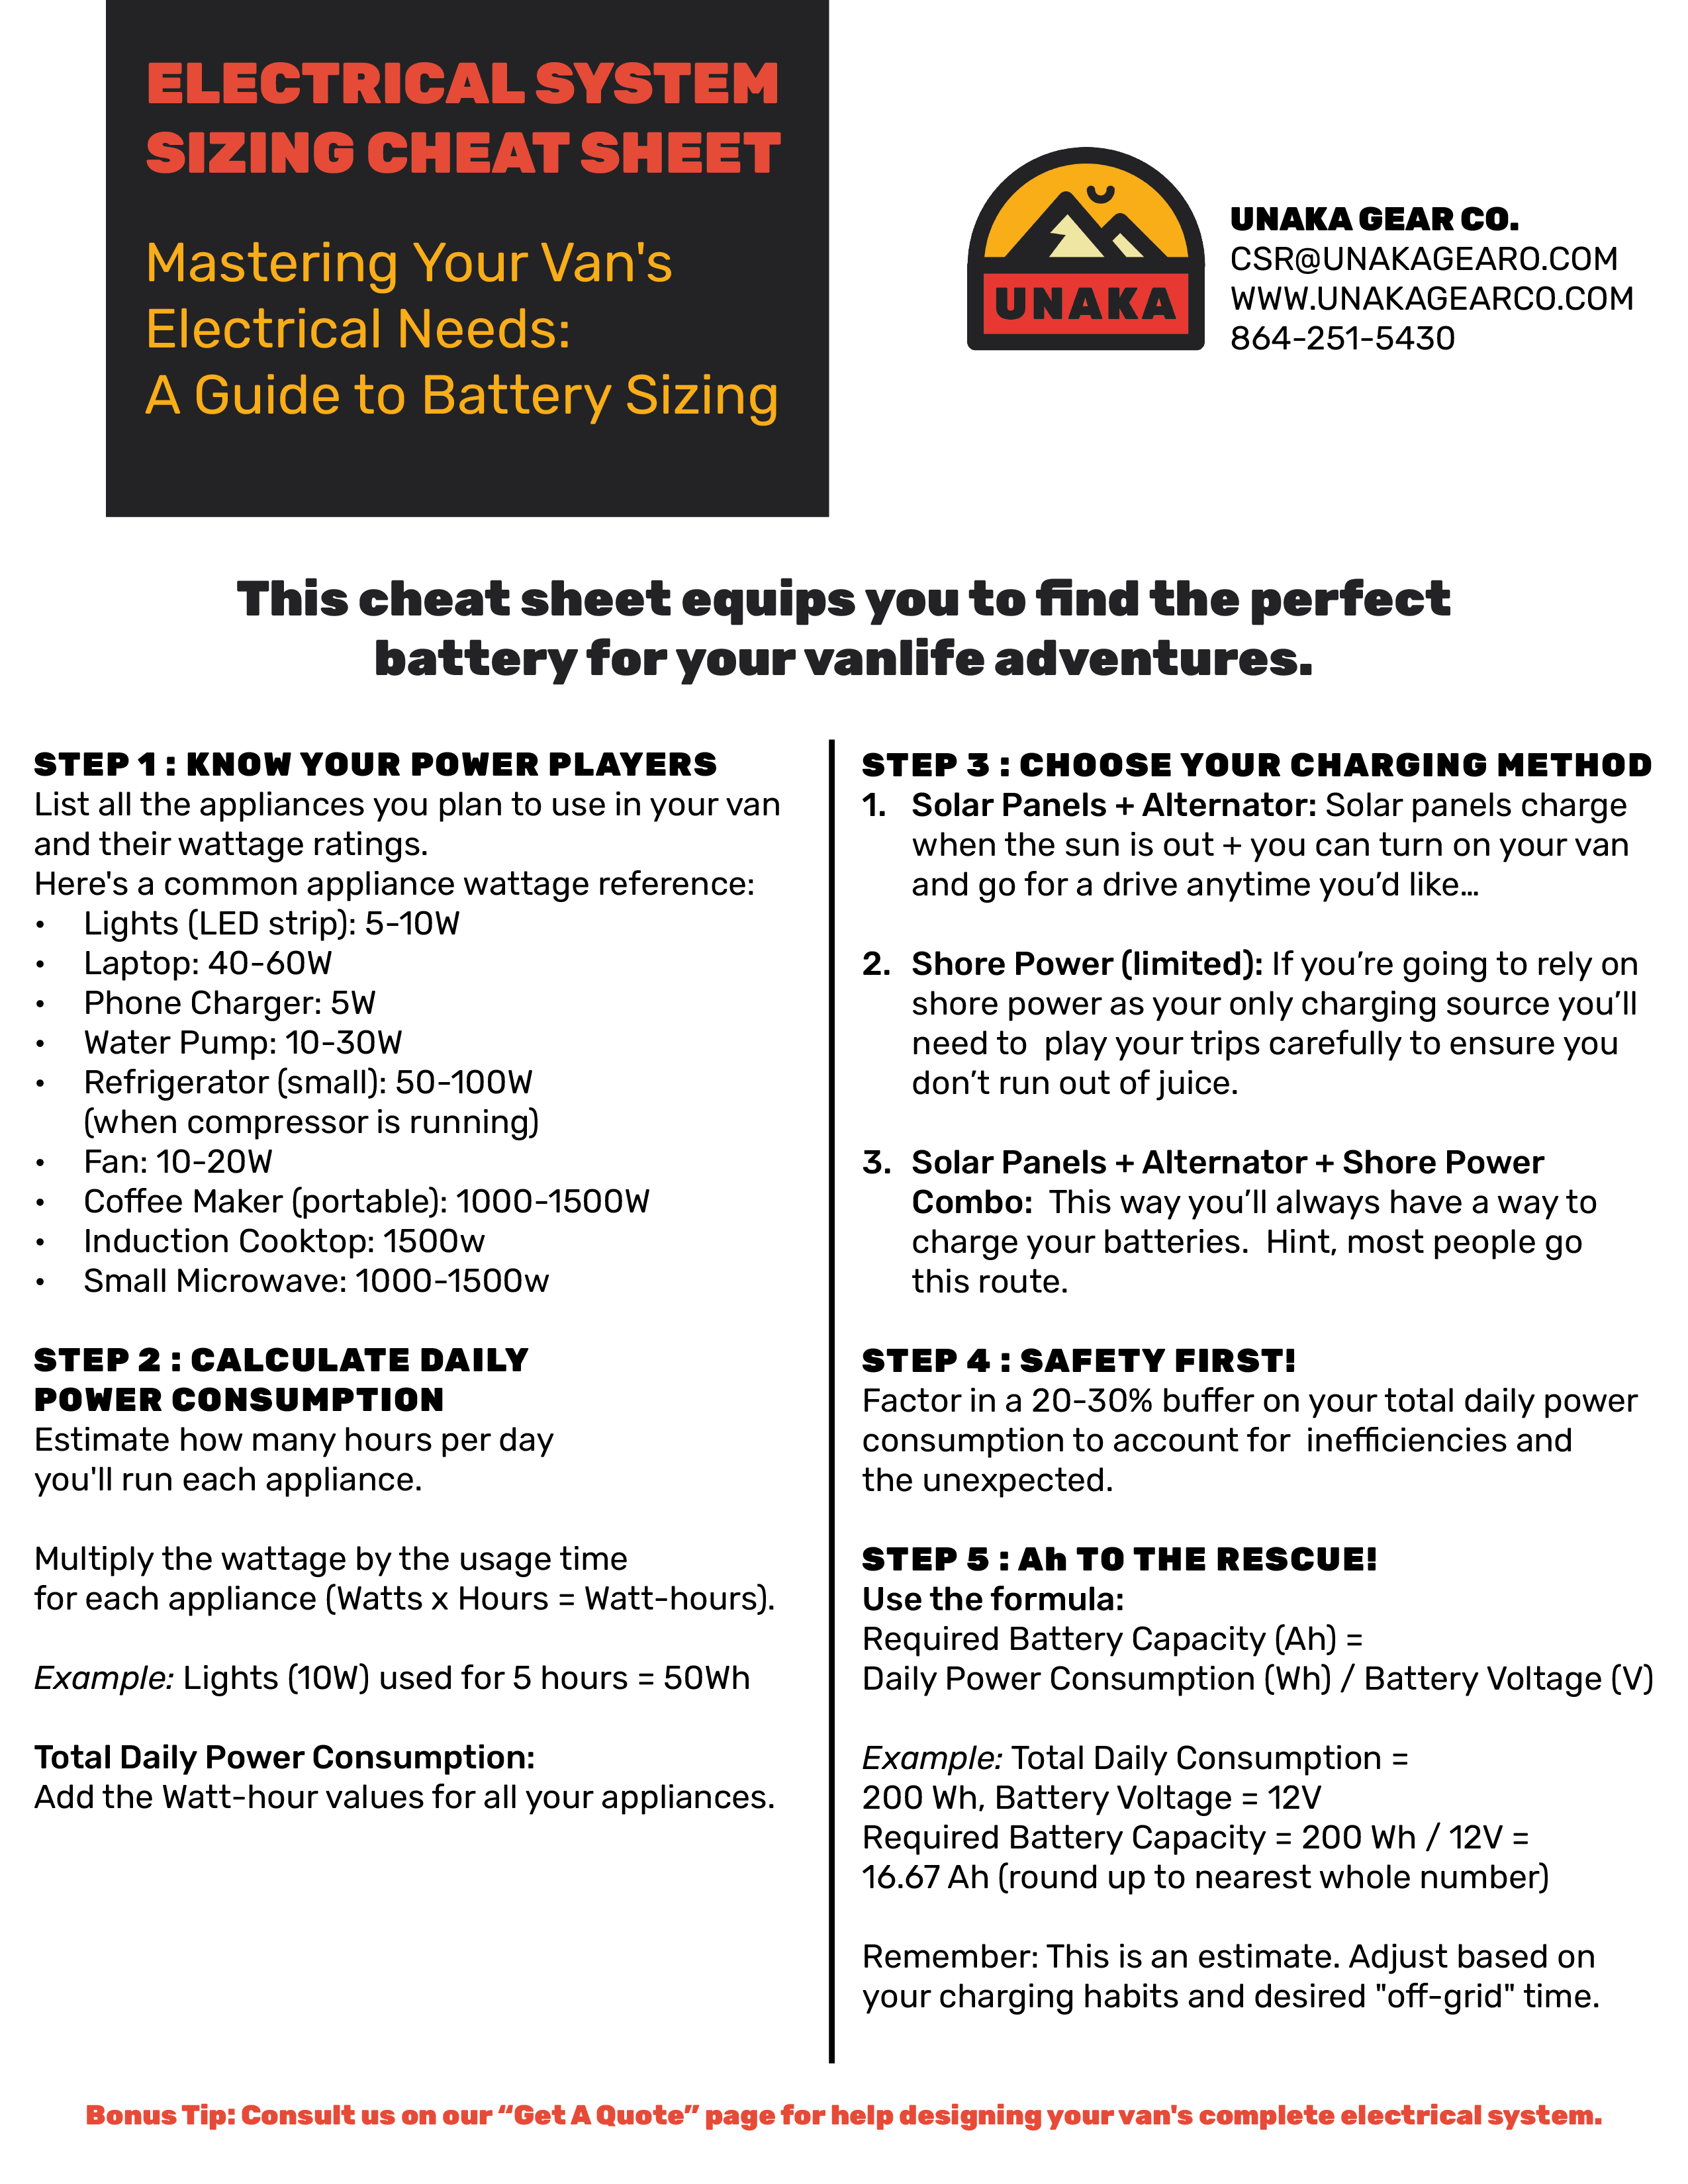 Electrical System Sizing Cheat Sheet